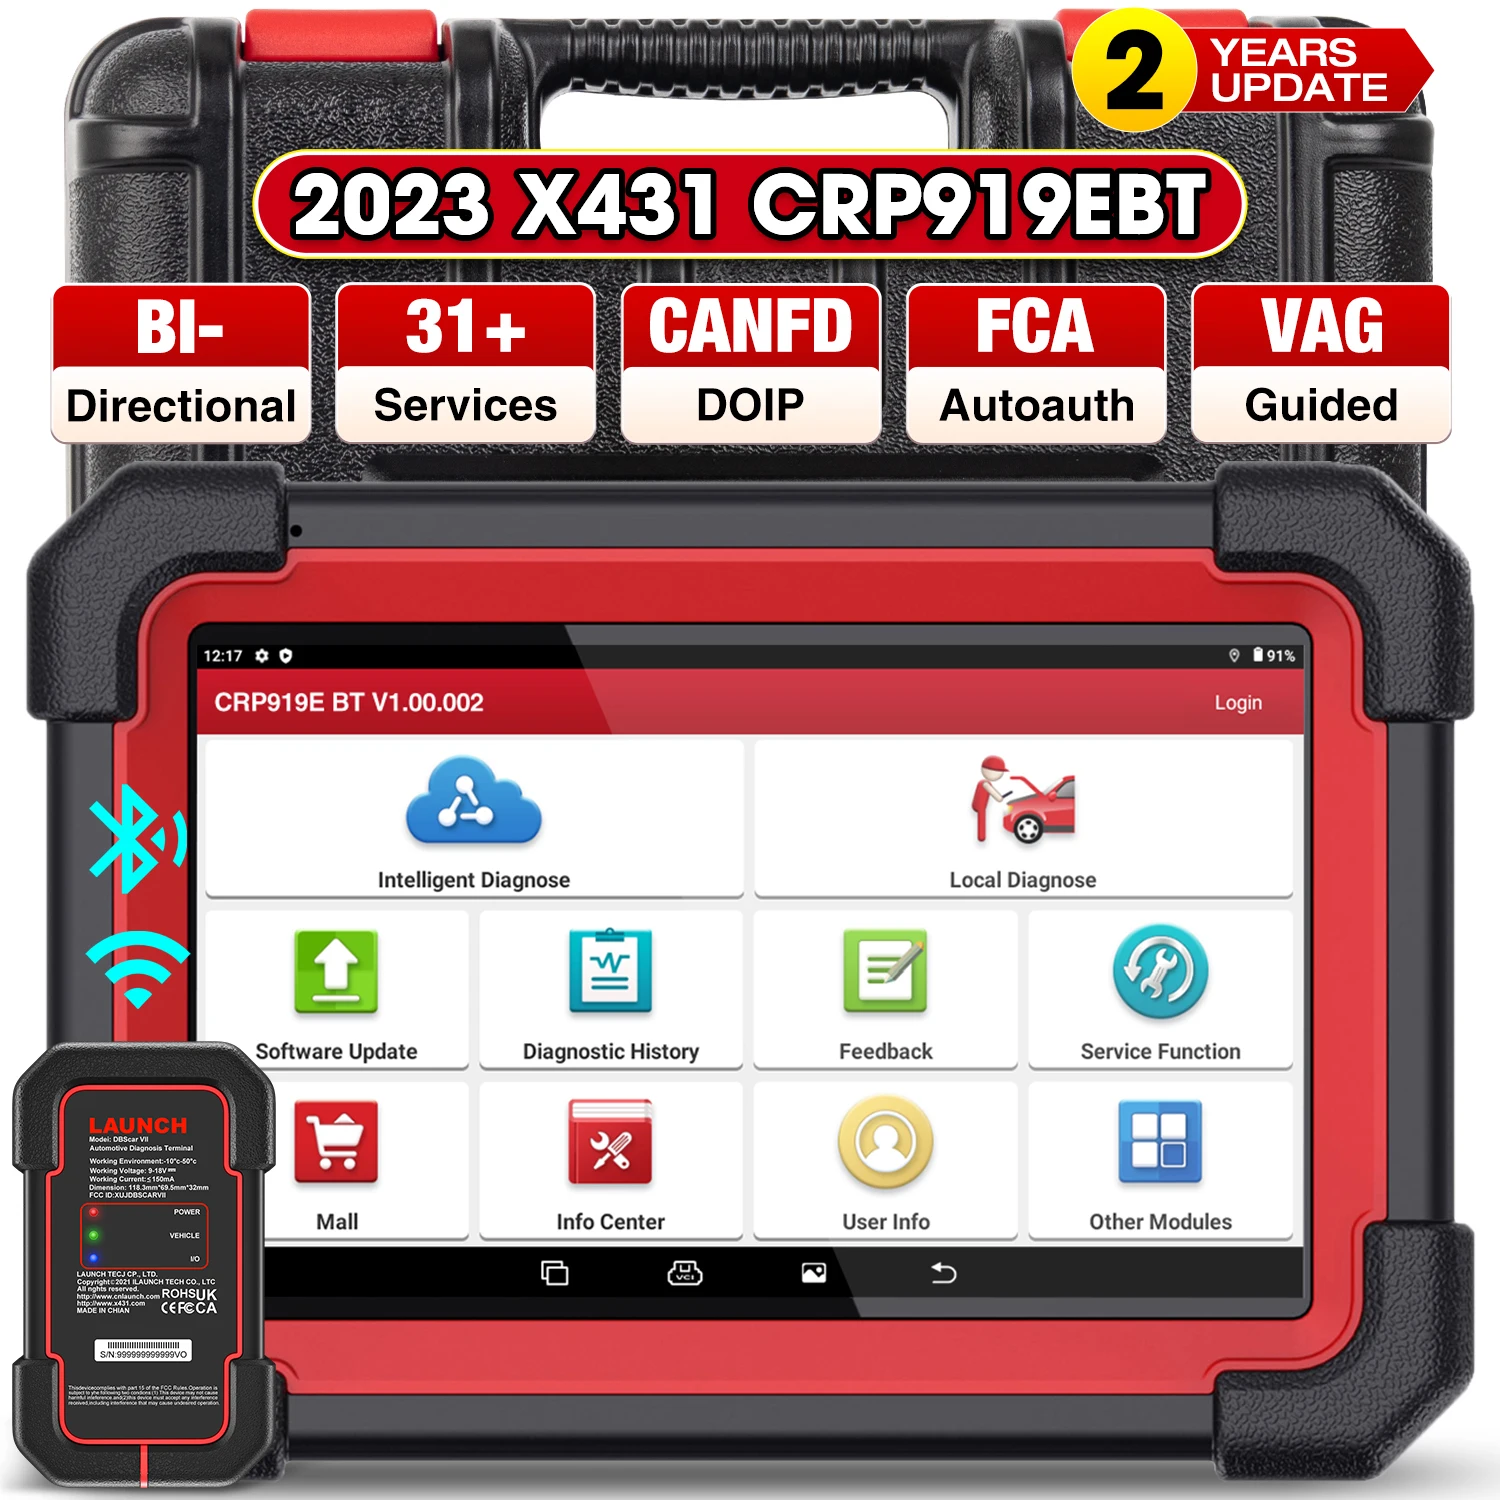 

Launch CRP919E Bluetooth CANFD DIOP Full System Code Reader Diagnostic Tools Machine OBD2 Scanner ECU Coding Active Test